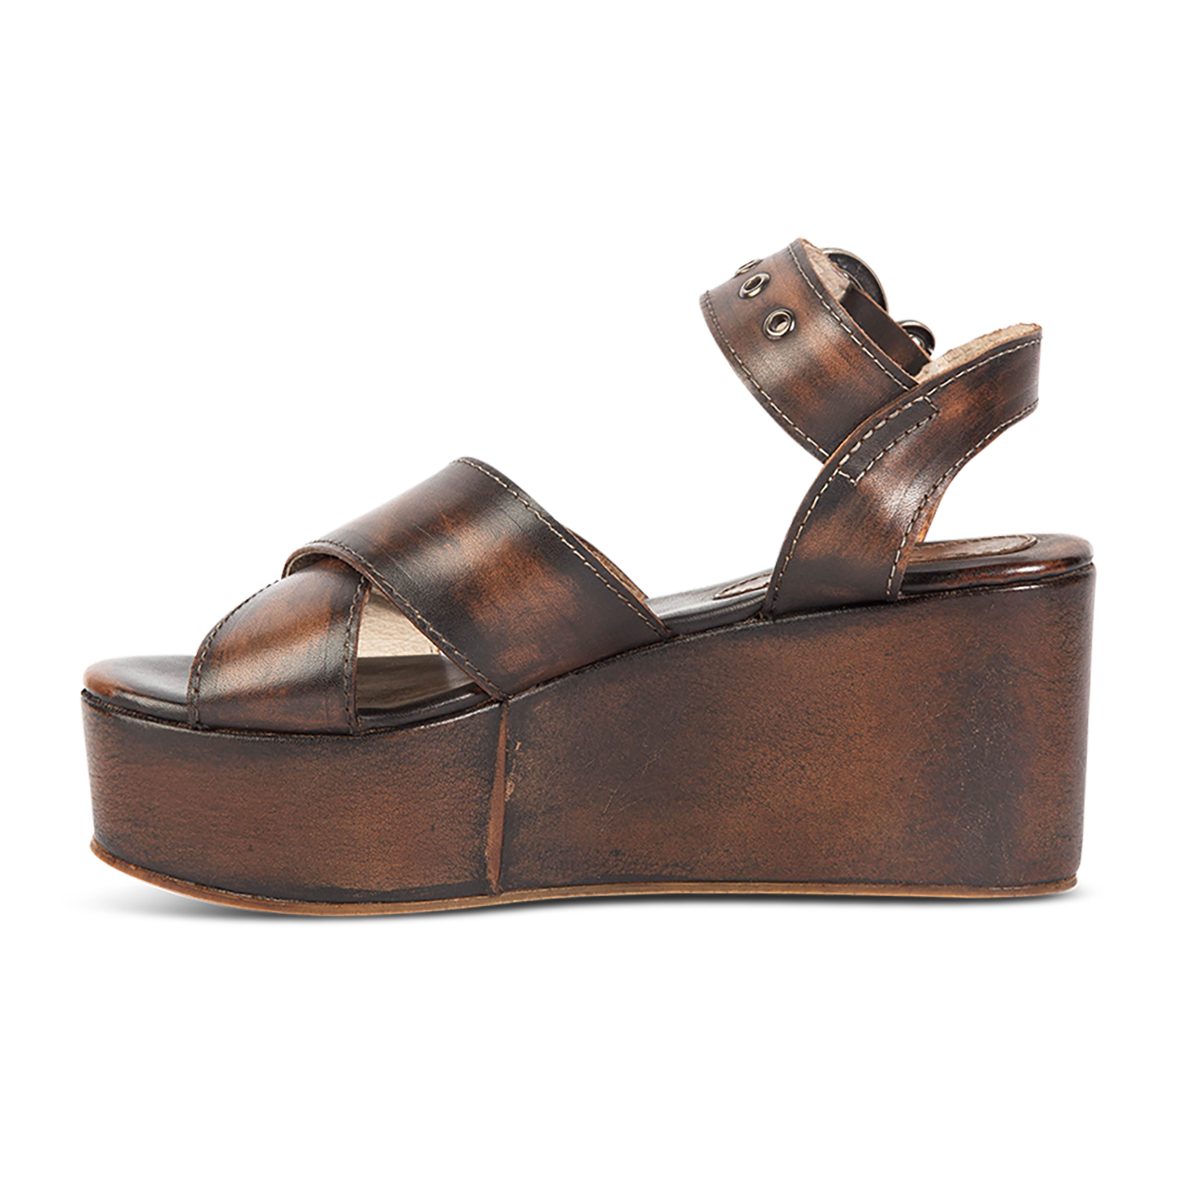 Inside view showing heel and straps on FREEBIRD women's Larae black distressed wedge sandal with platform heel and an adjustable ankle strap